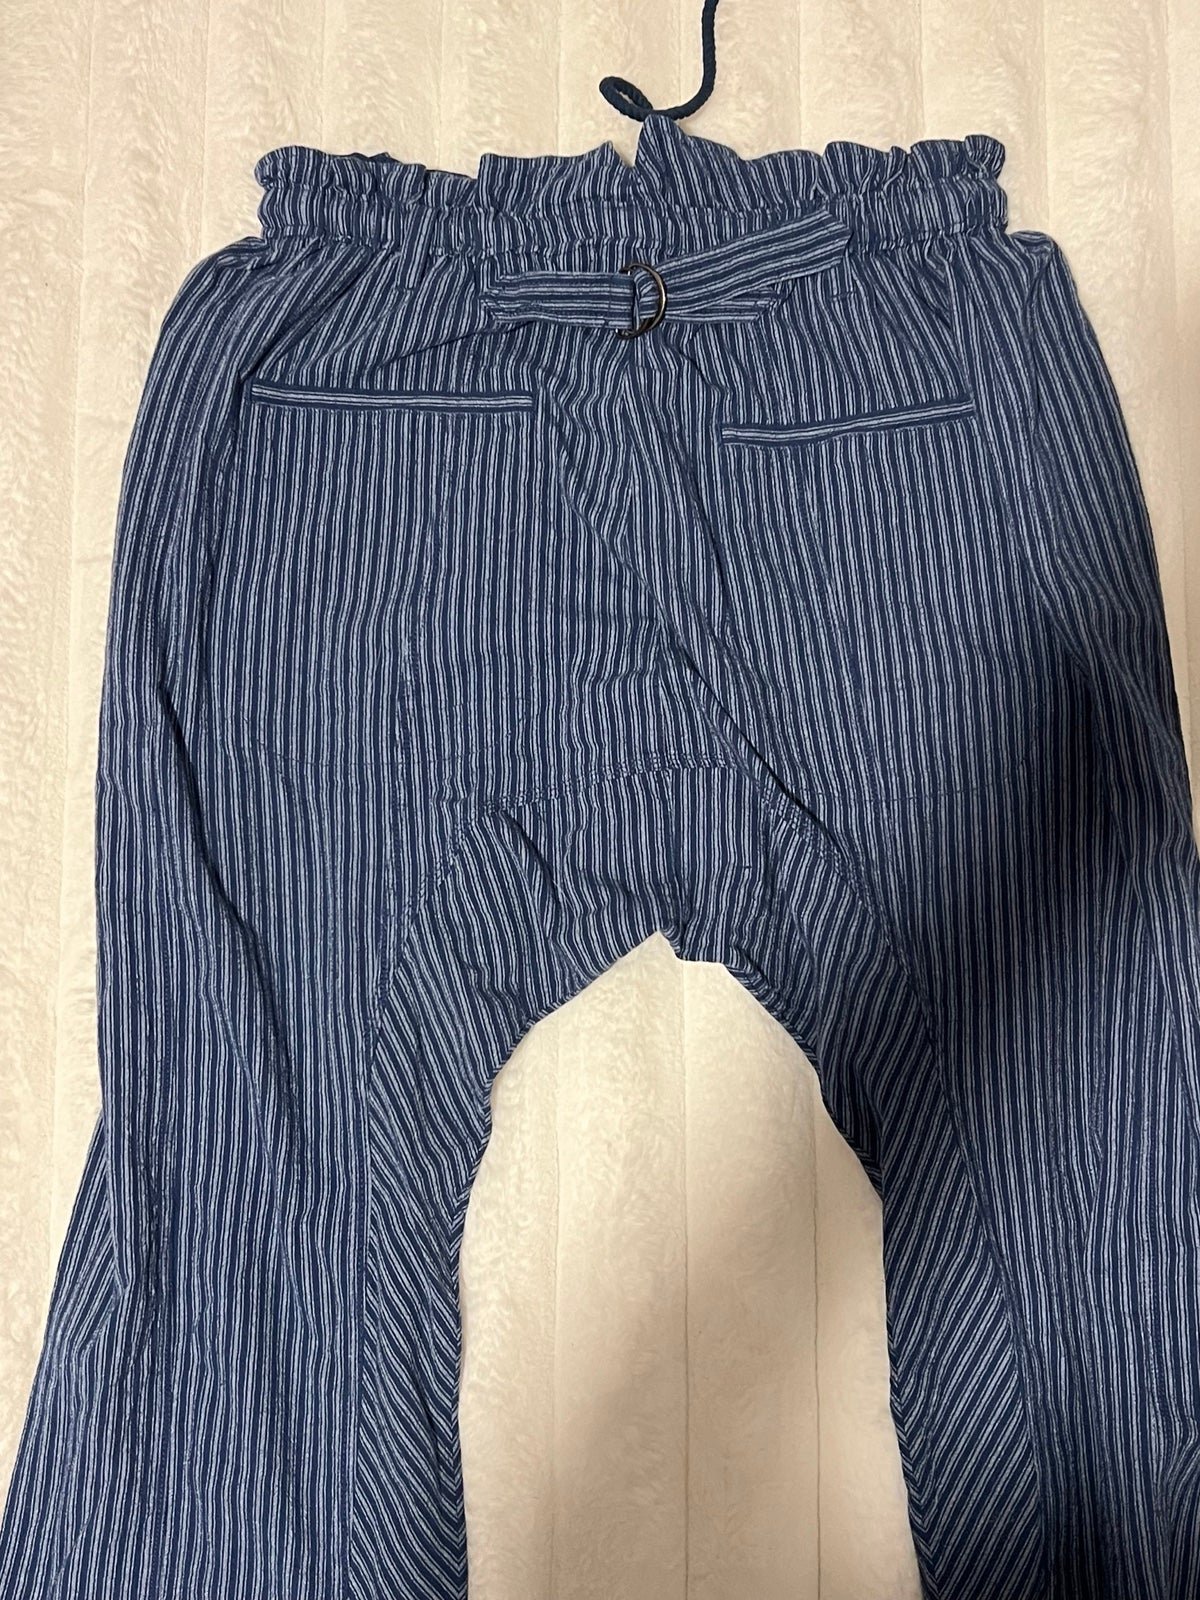 the Lowest price NWOT Free People Runyon Pant , Harem Navy Striped Dropped Crotch Gye9v8R2o hot sale